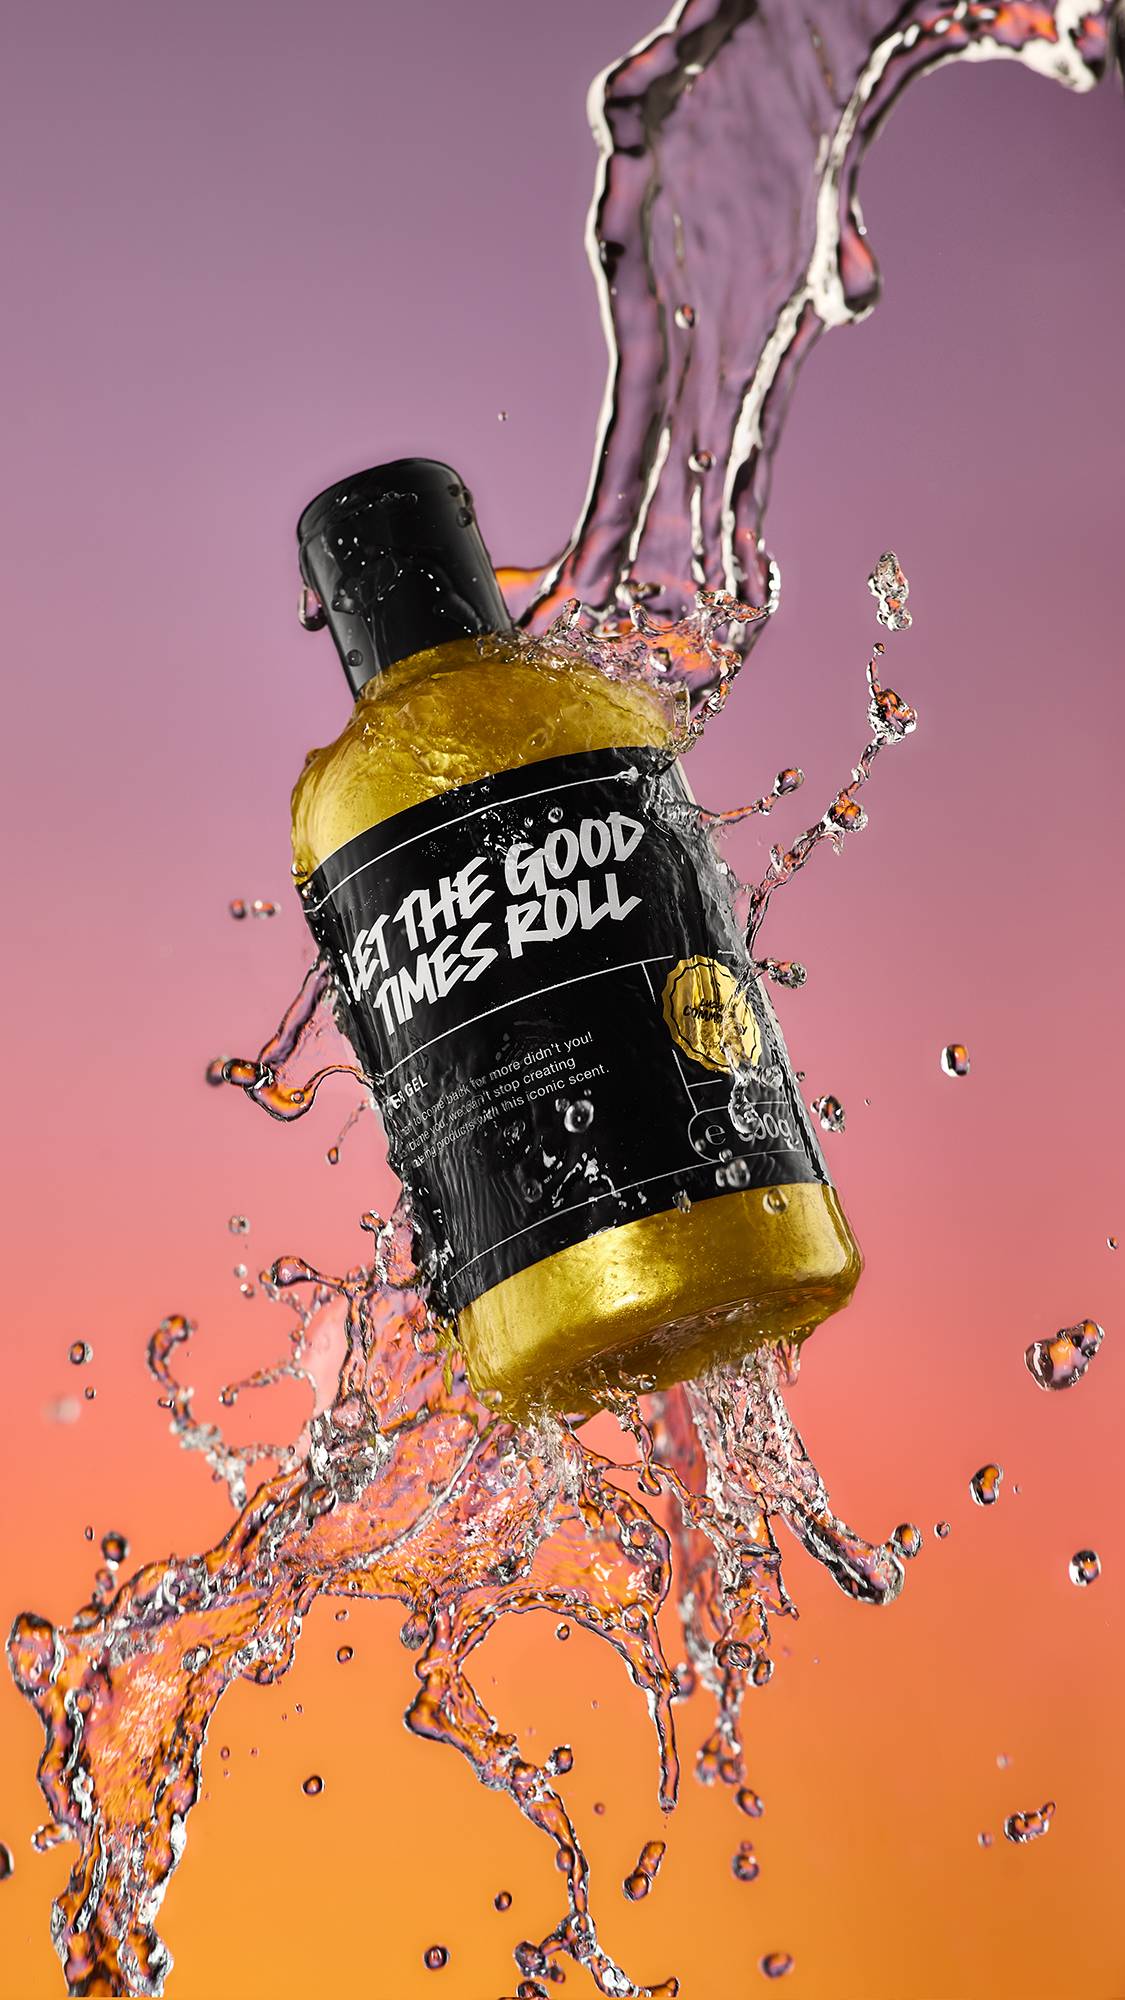 A high-definition action shot of the Let The Good Times Roll shower gel bottle mid-air being splashed by fresh water surrounded by droplets on a blurred purple and orange background.